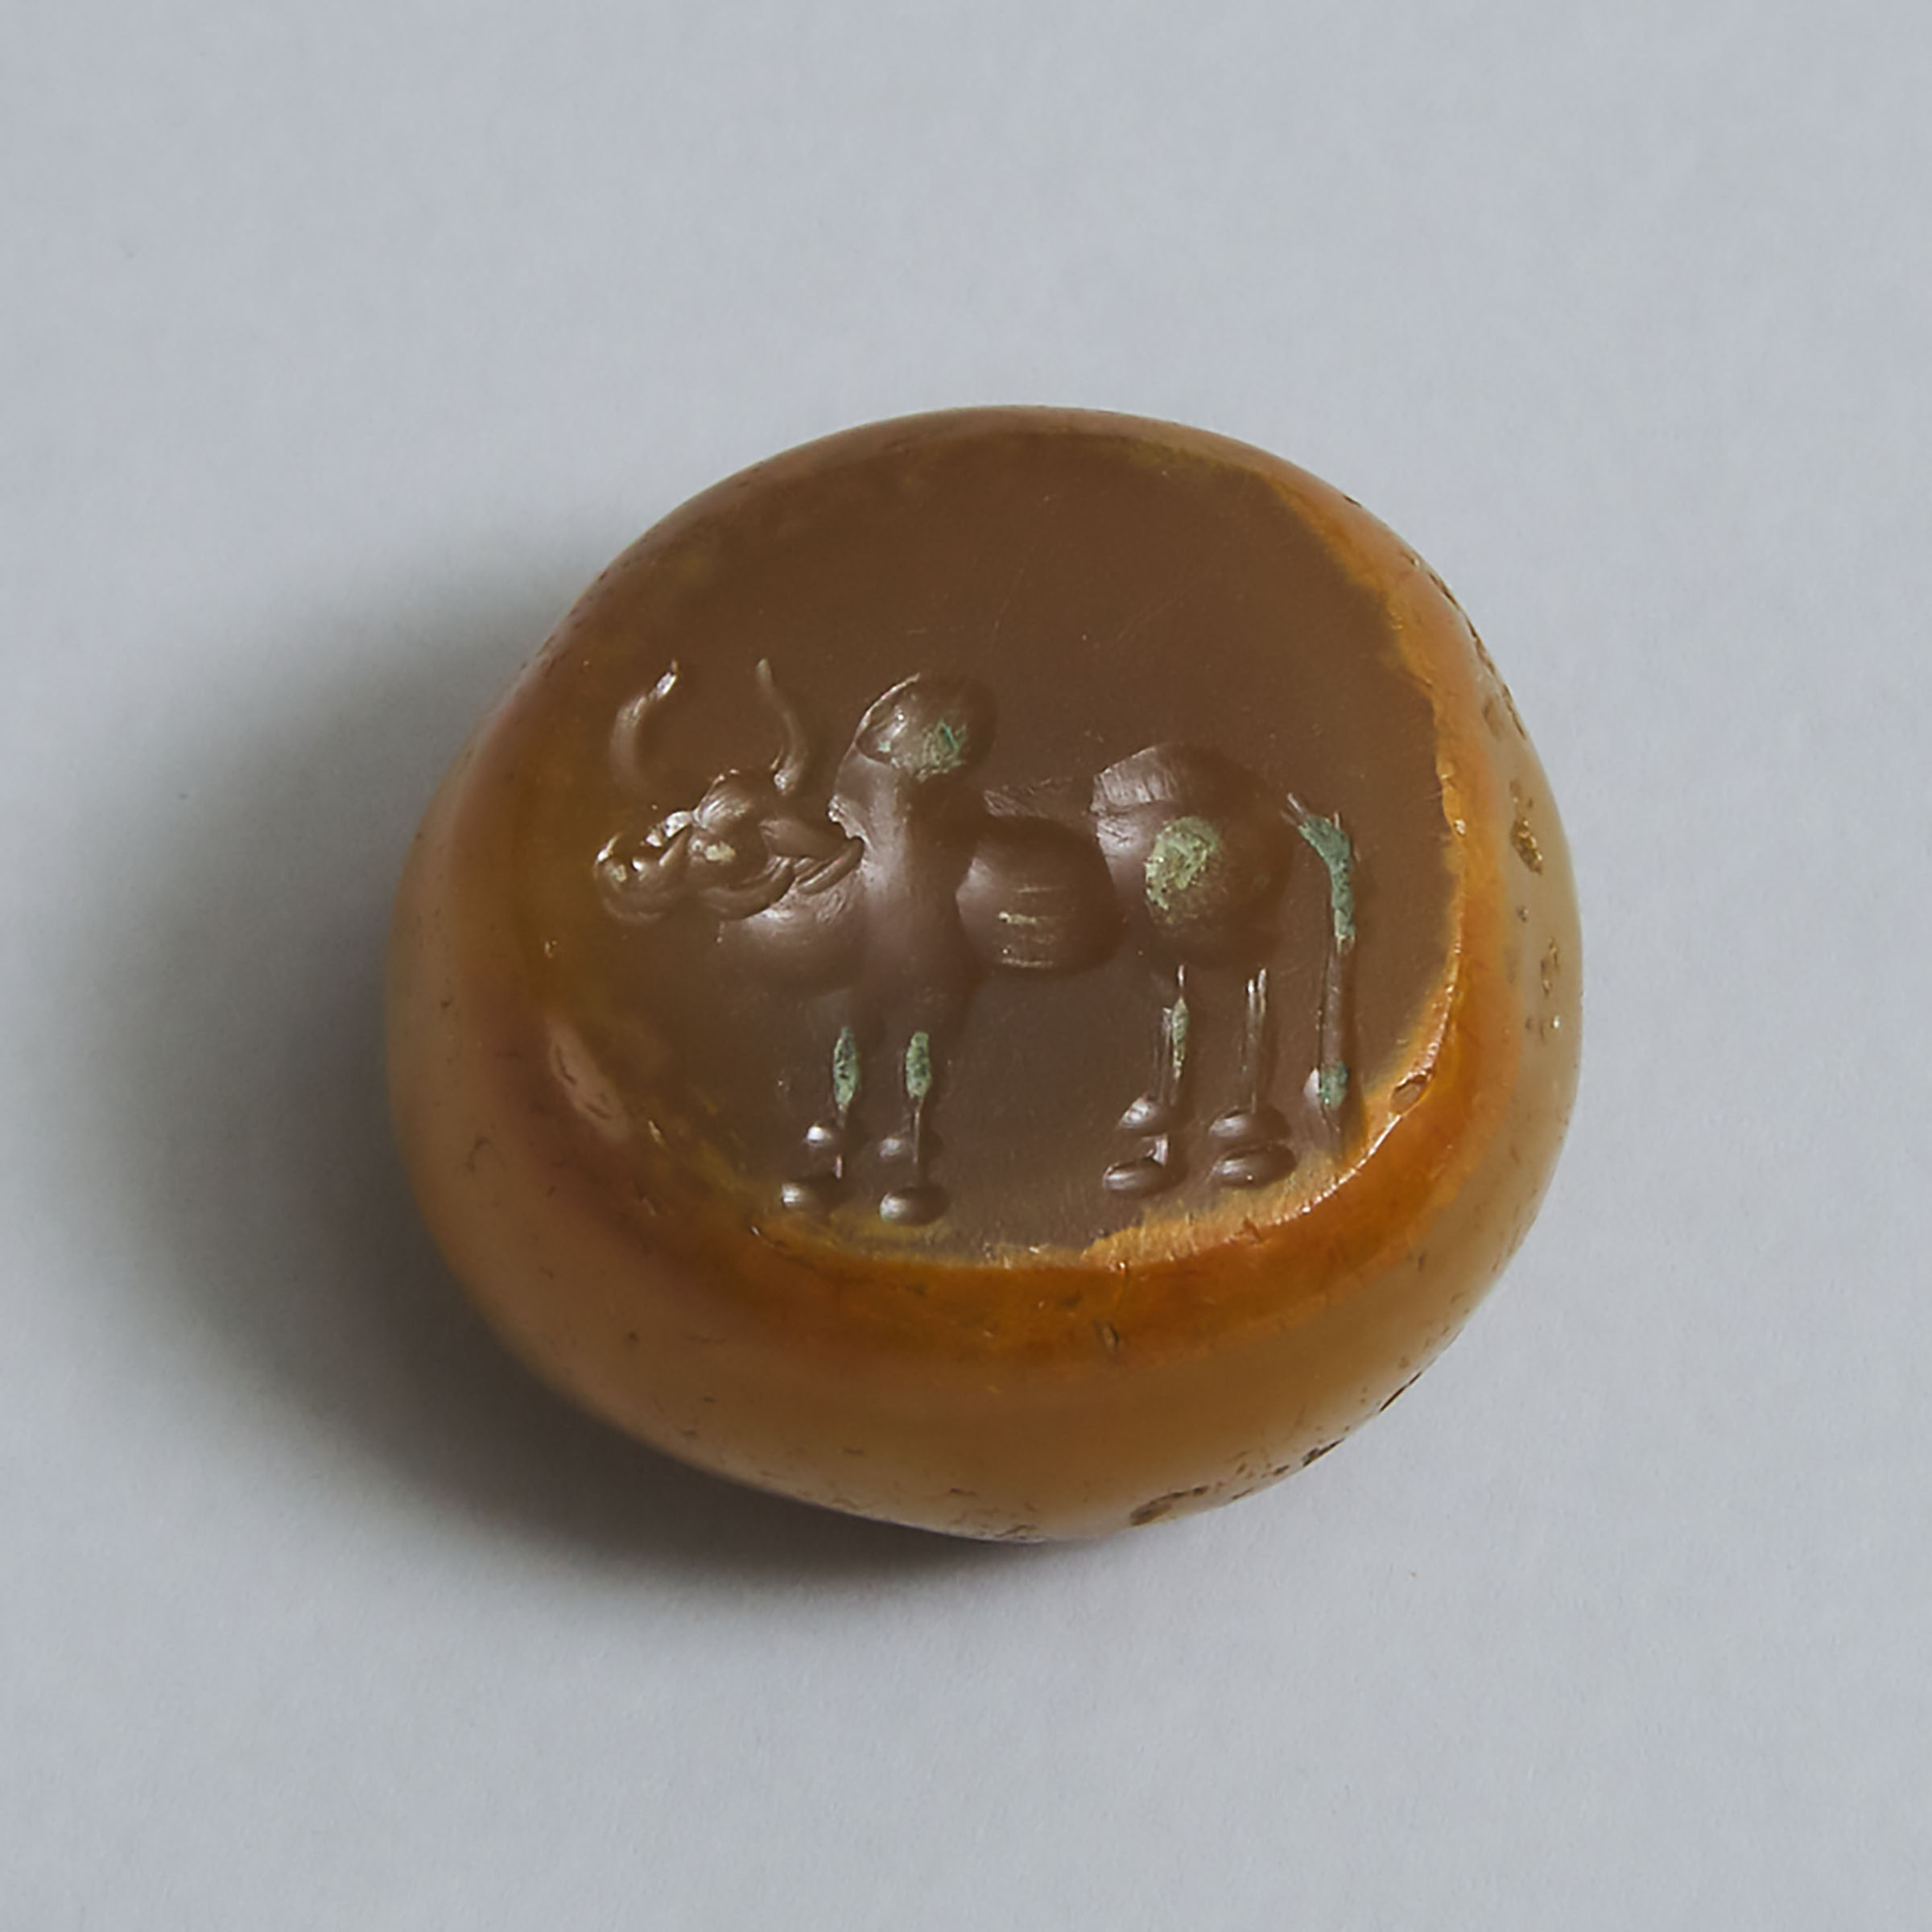 Indus Valley Carnelian Intaglio Seal With a Bull, 2600-1900 B.C.